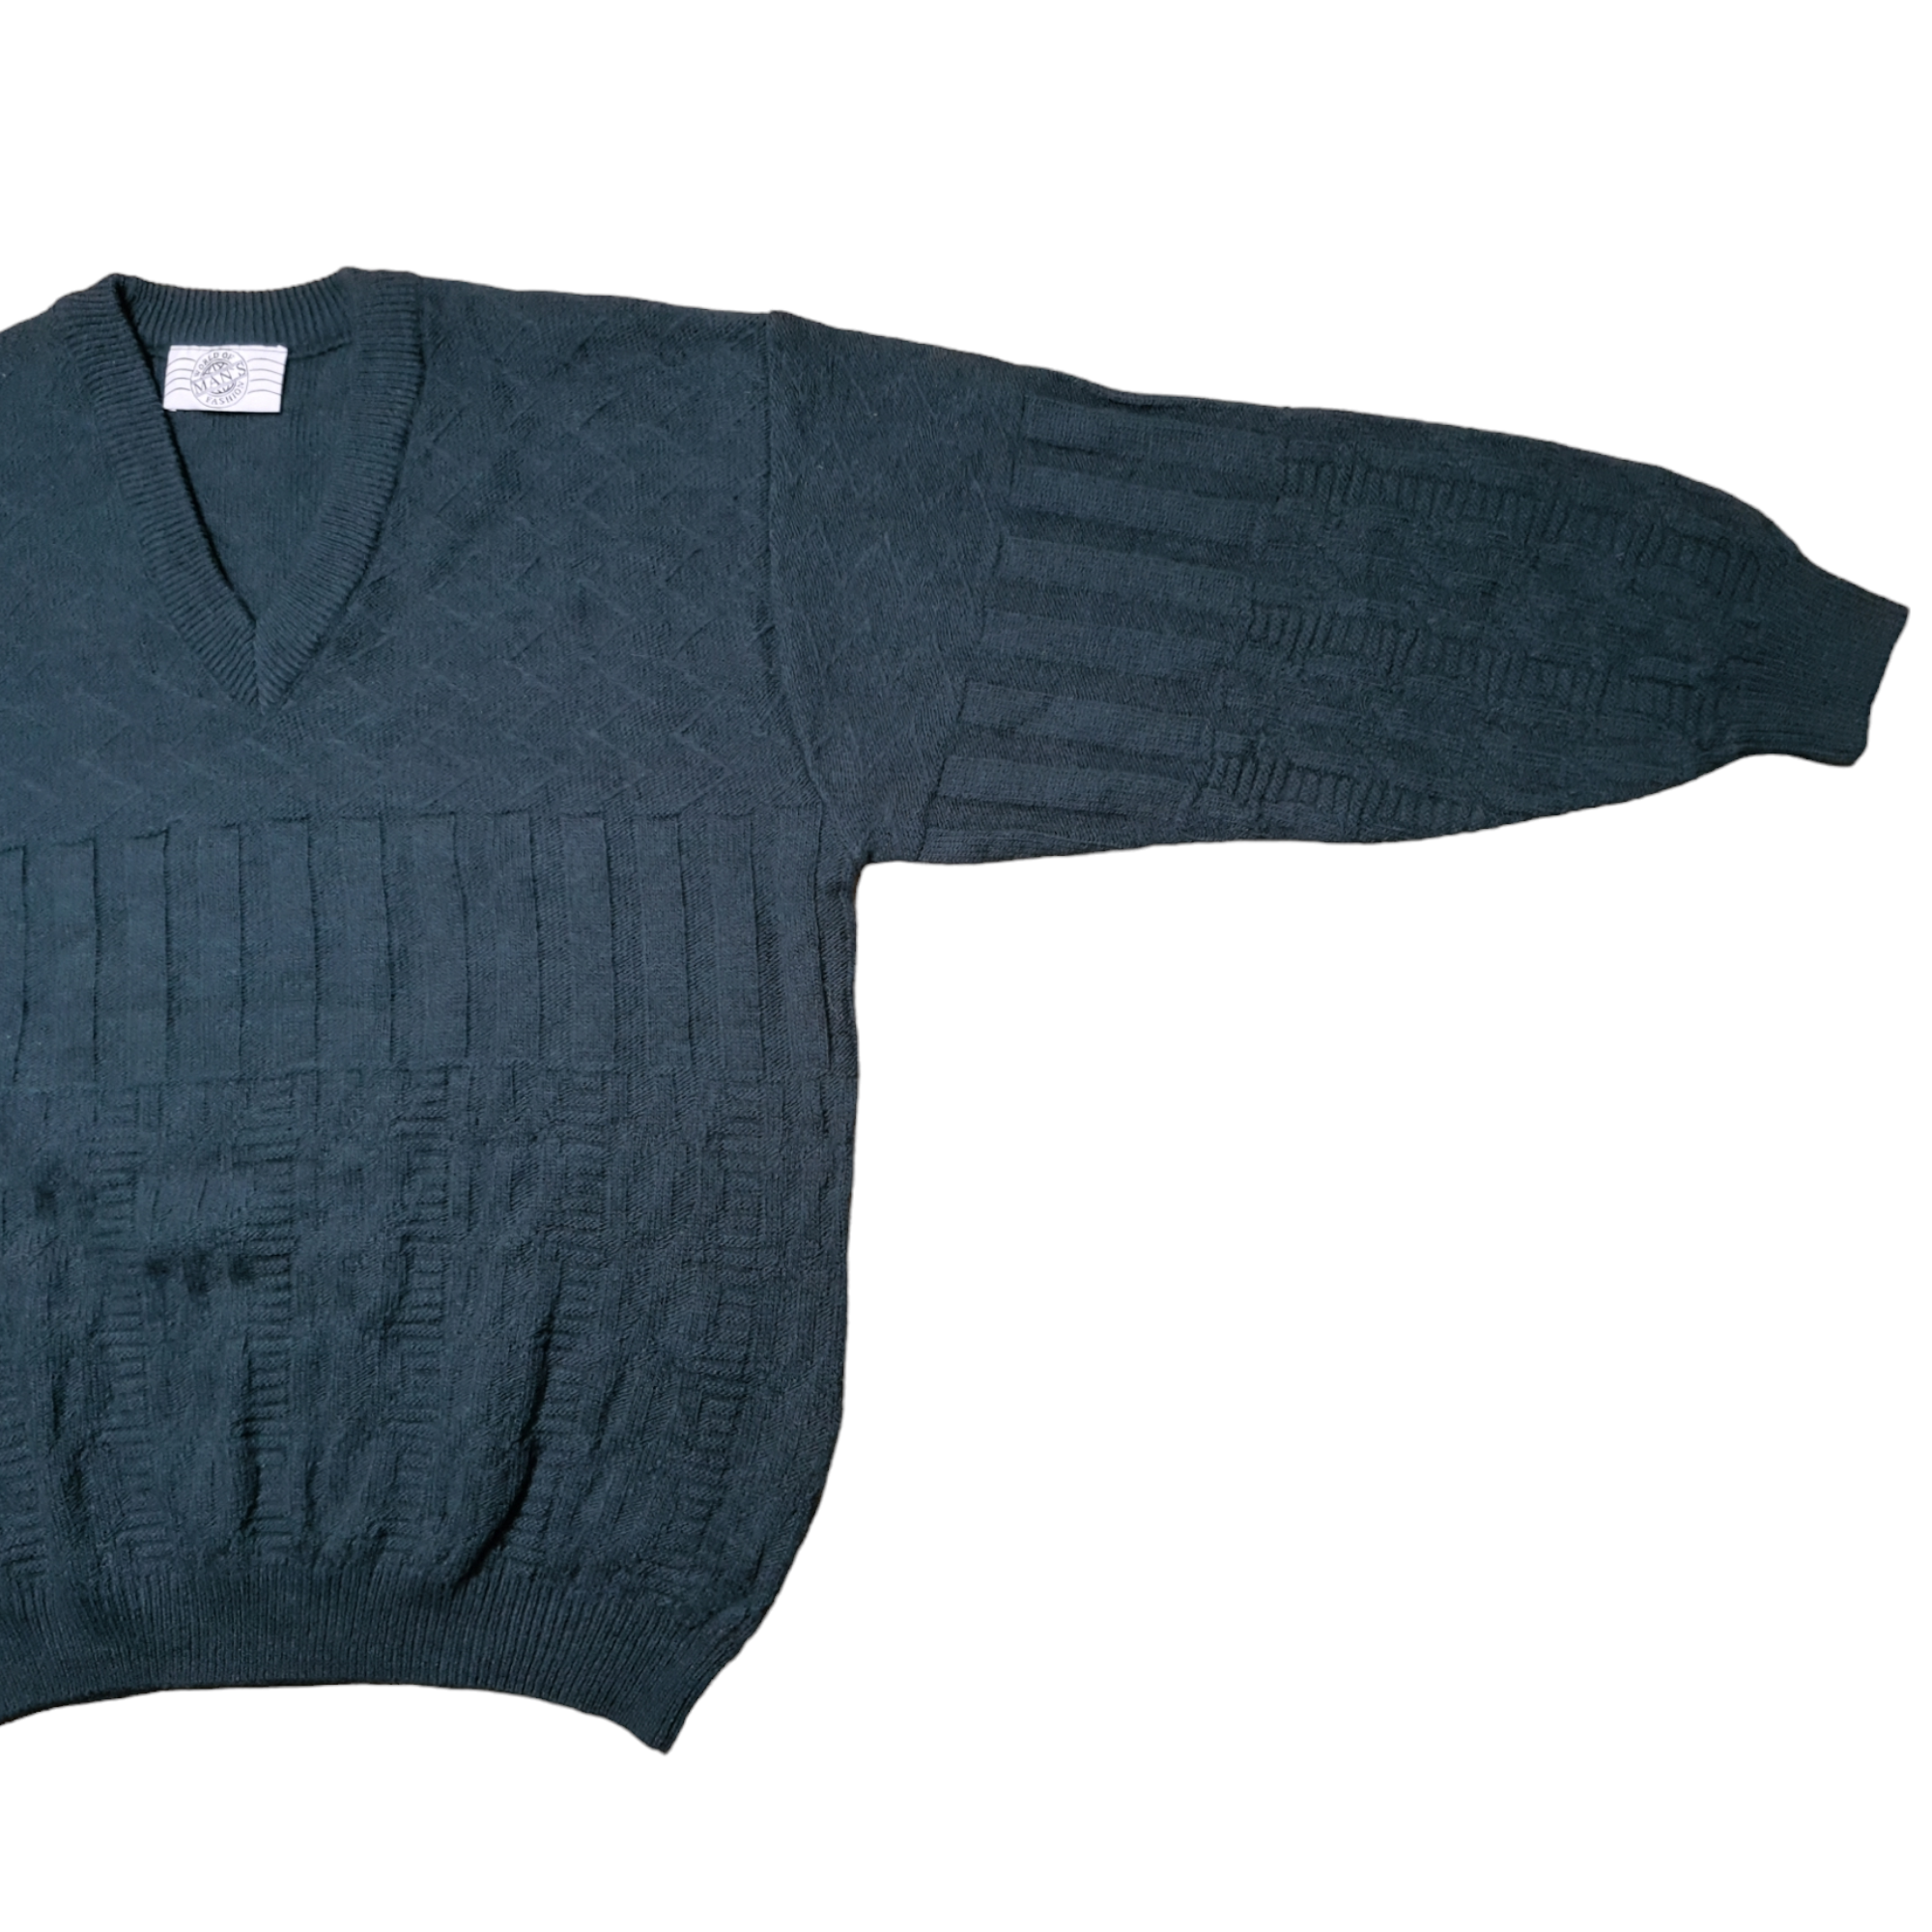 [L] World of man's fashion knitted sweater